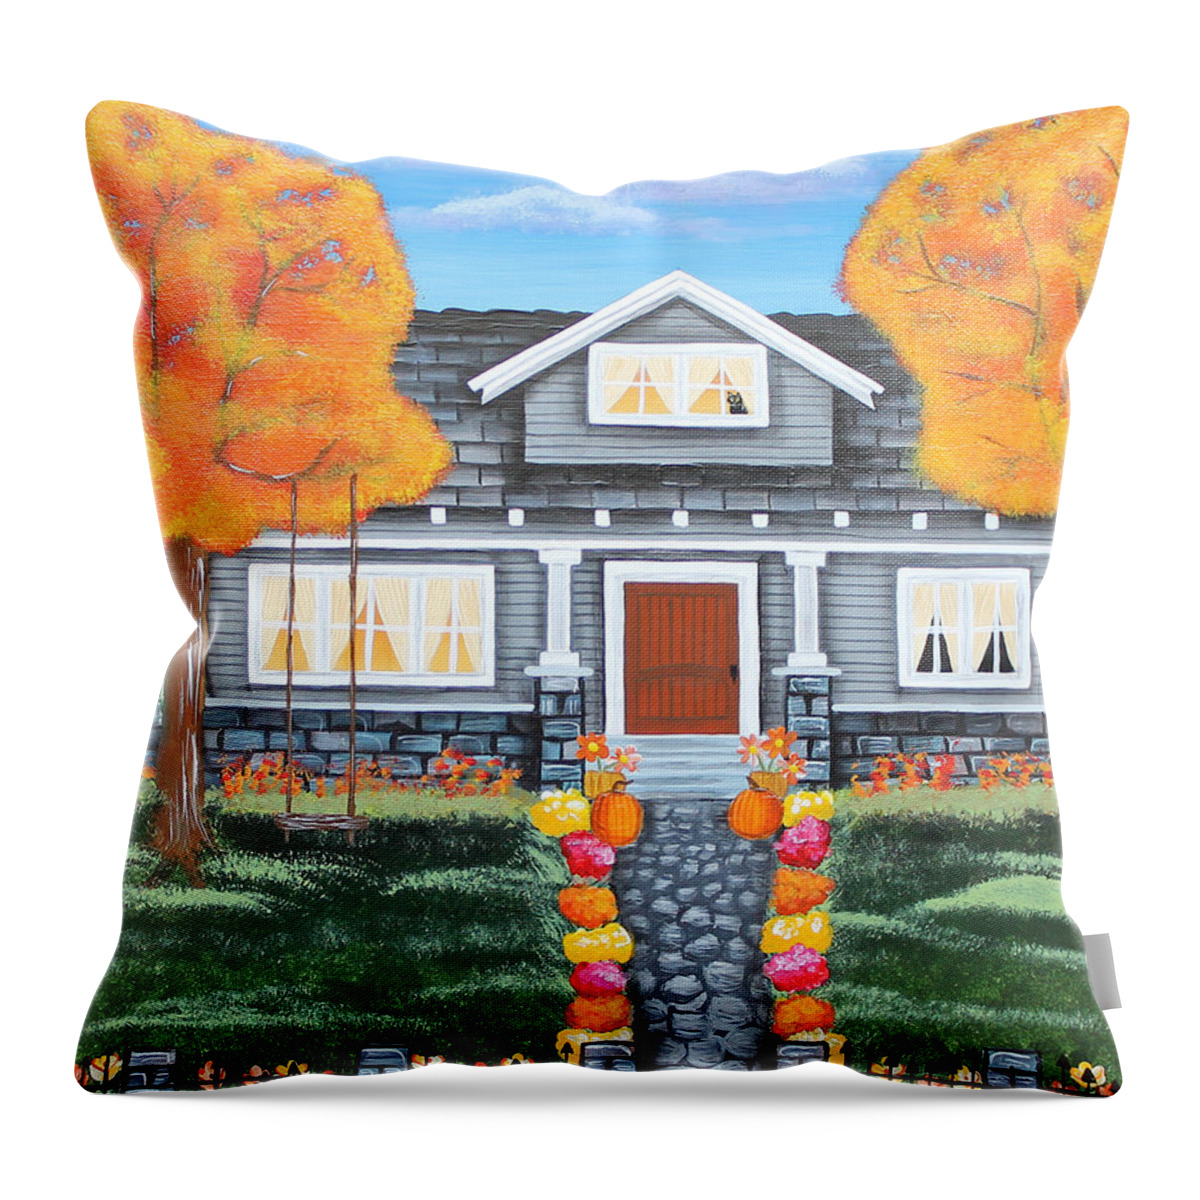 Landscape Throw Pillow featuring the painting Home Sweet Home - Comes Autumn by Melissa Toppenberg